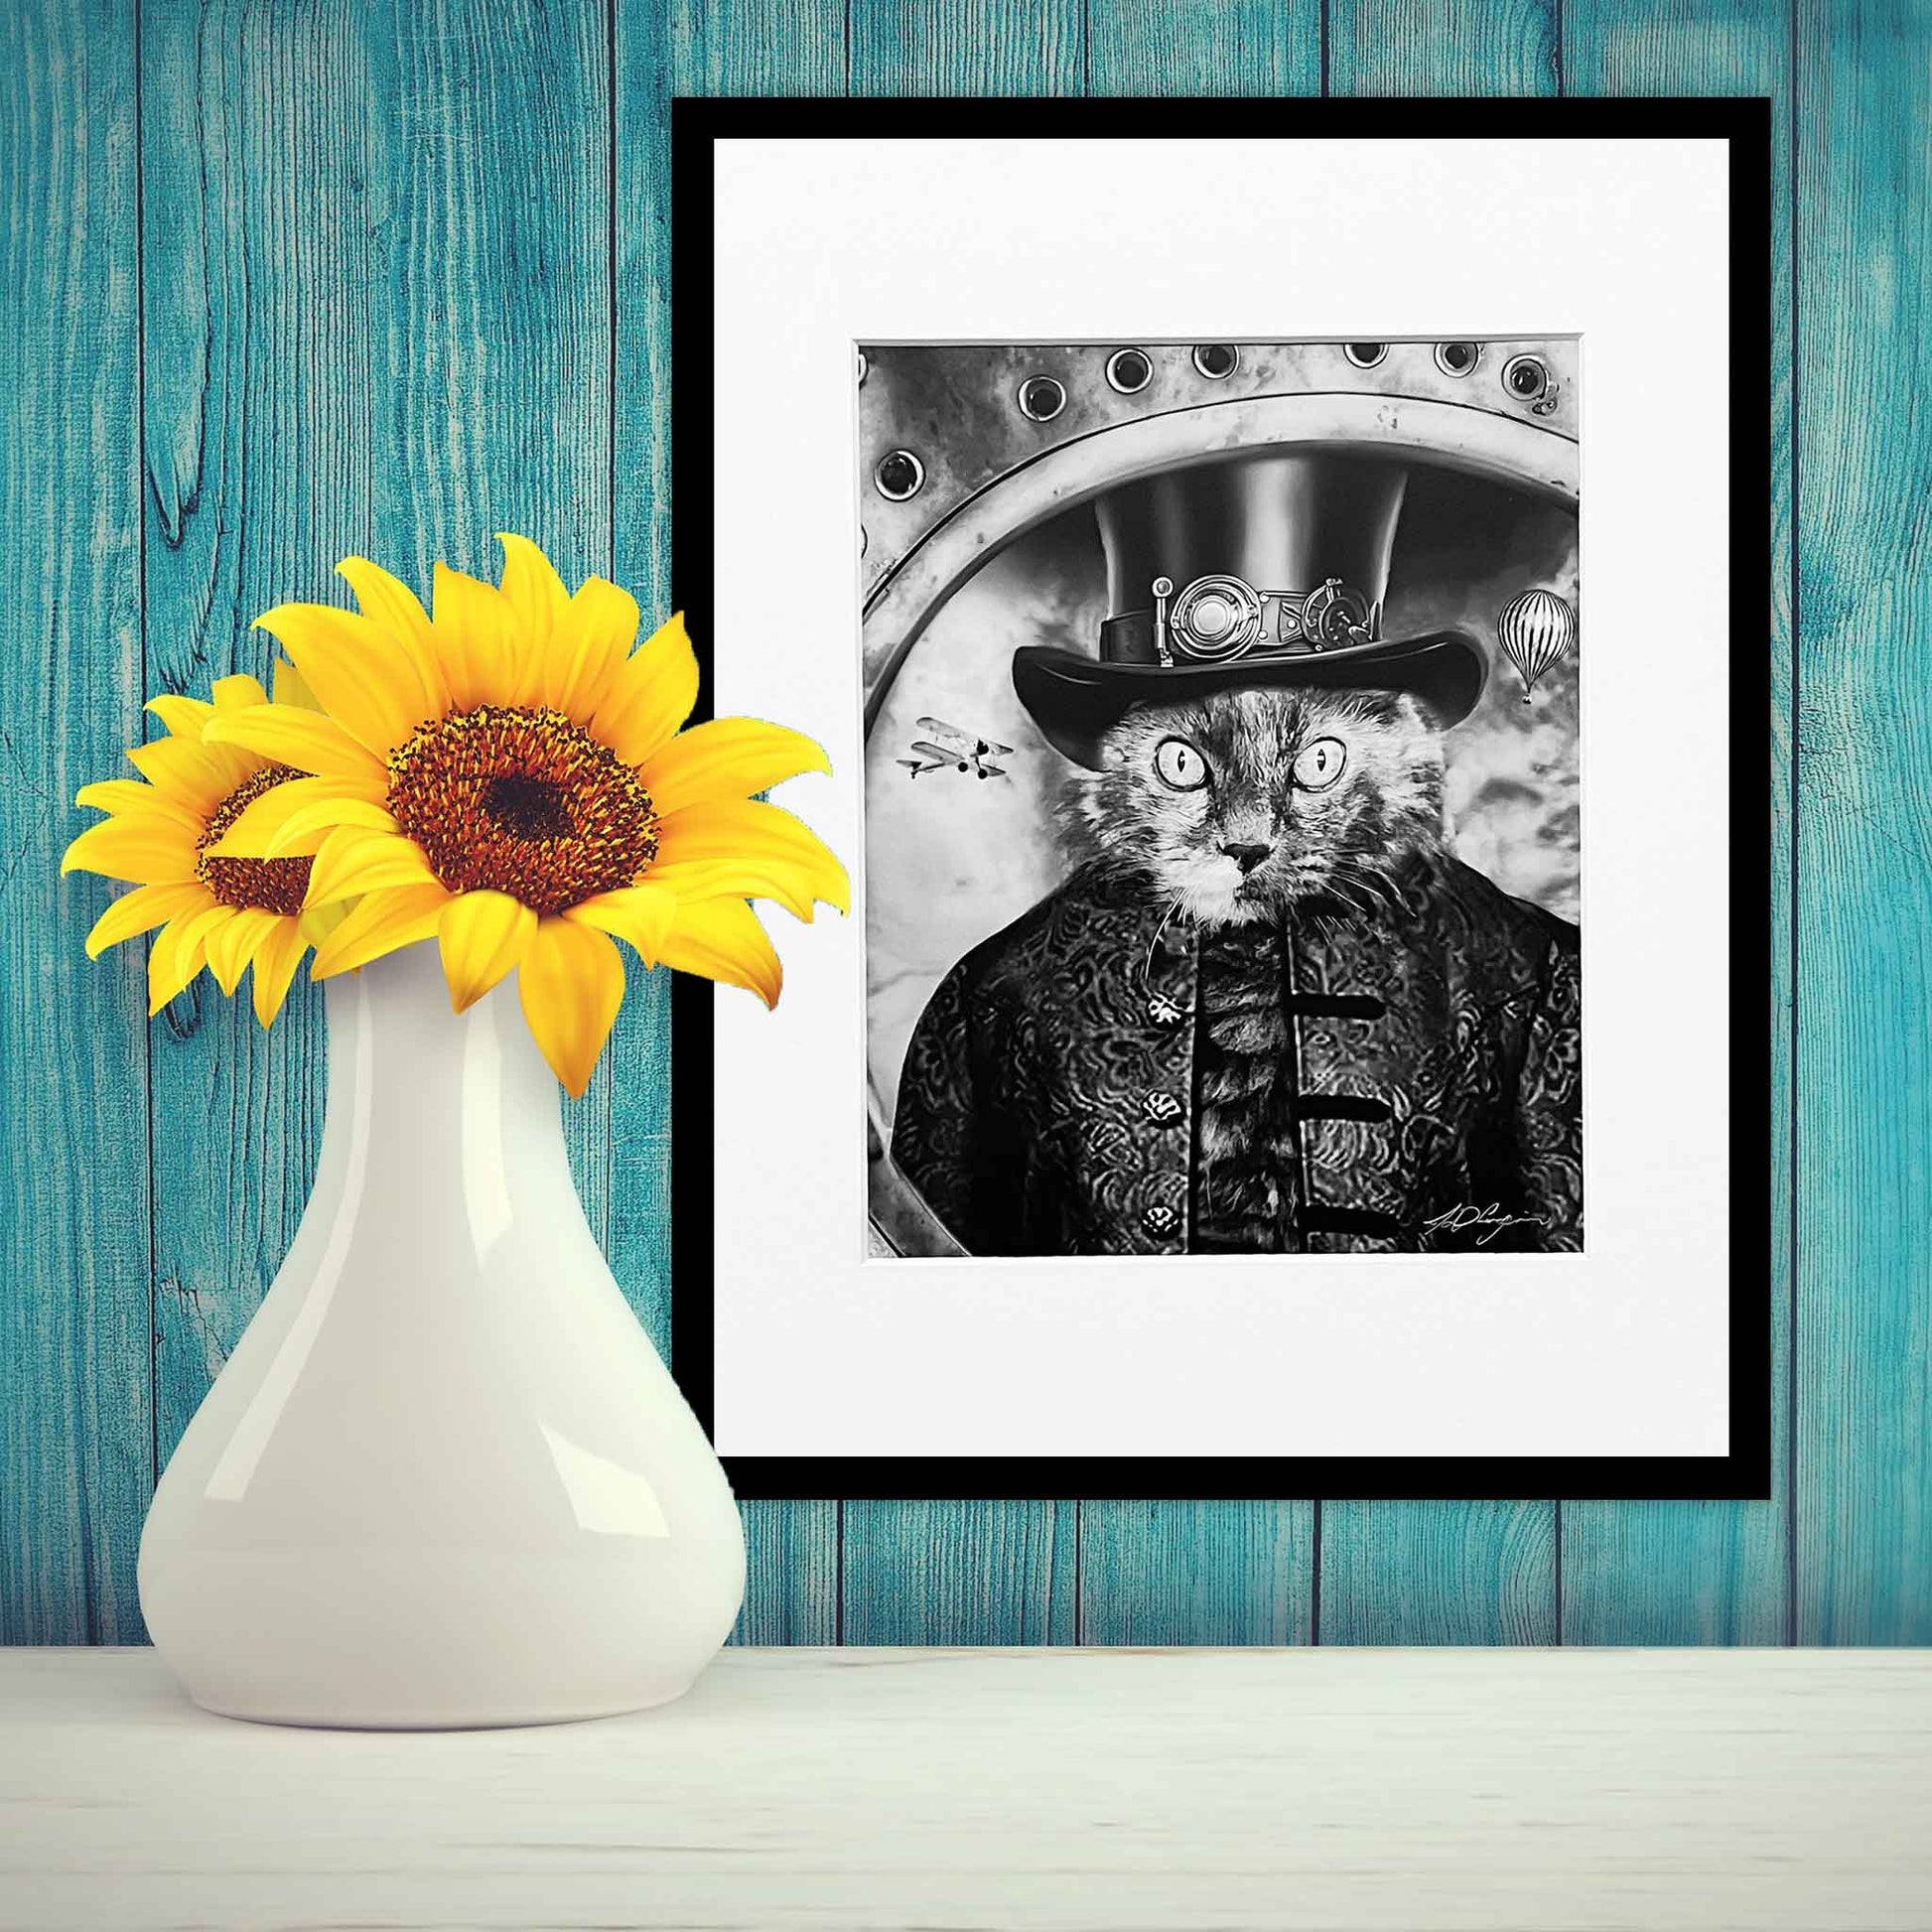 Composite, Black and white, photograph, Cat, Kitty, steampunk, 8 X 10 print Framed, 8 X 10 print matted to 11 X 14, Charles Dean Carpino